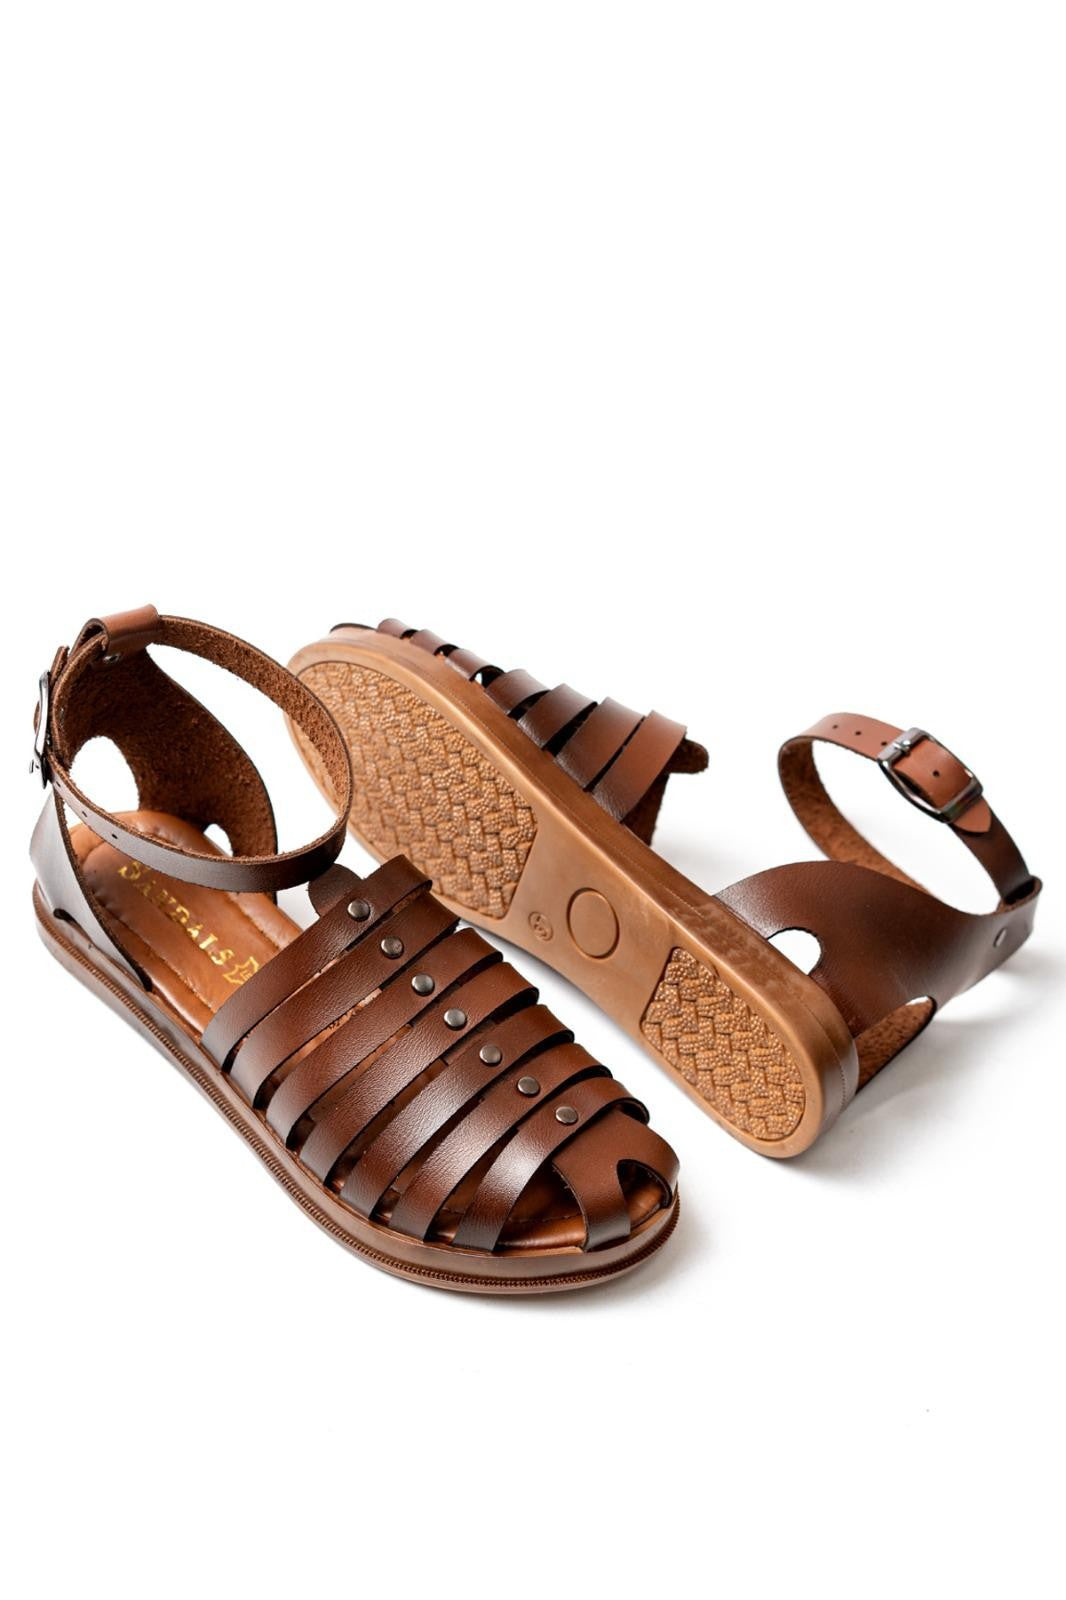 Women's Motali Brown Leather Sandals - STREETMODE ™